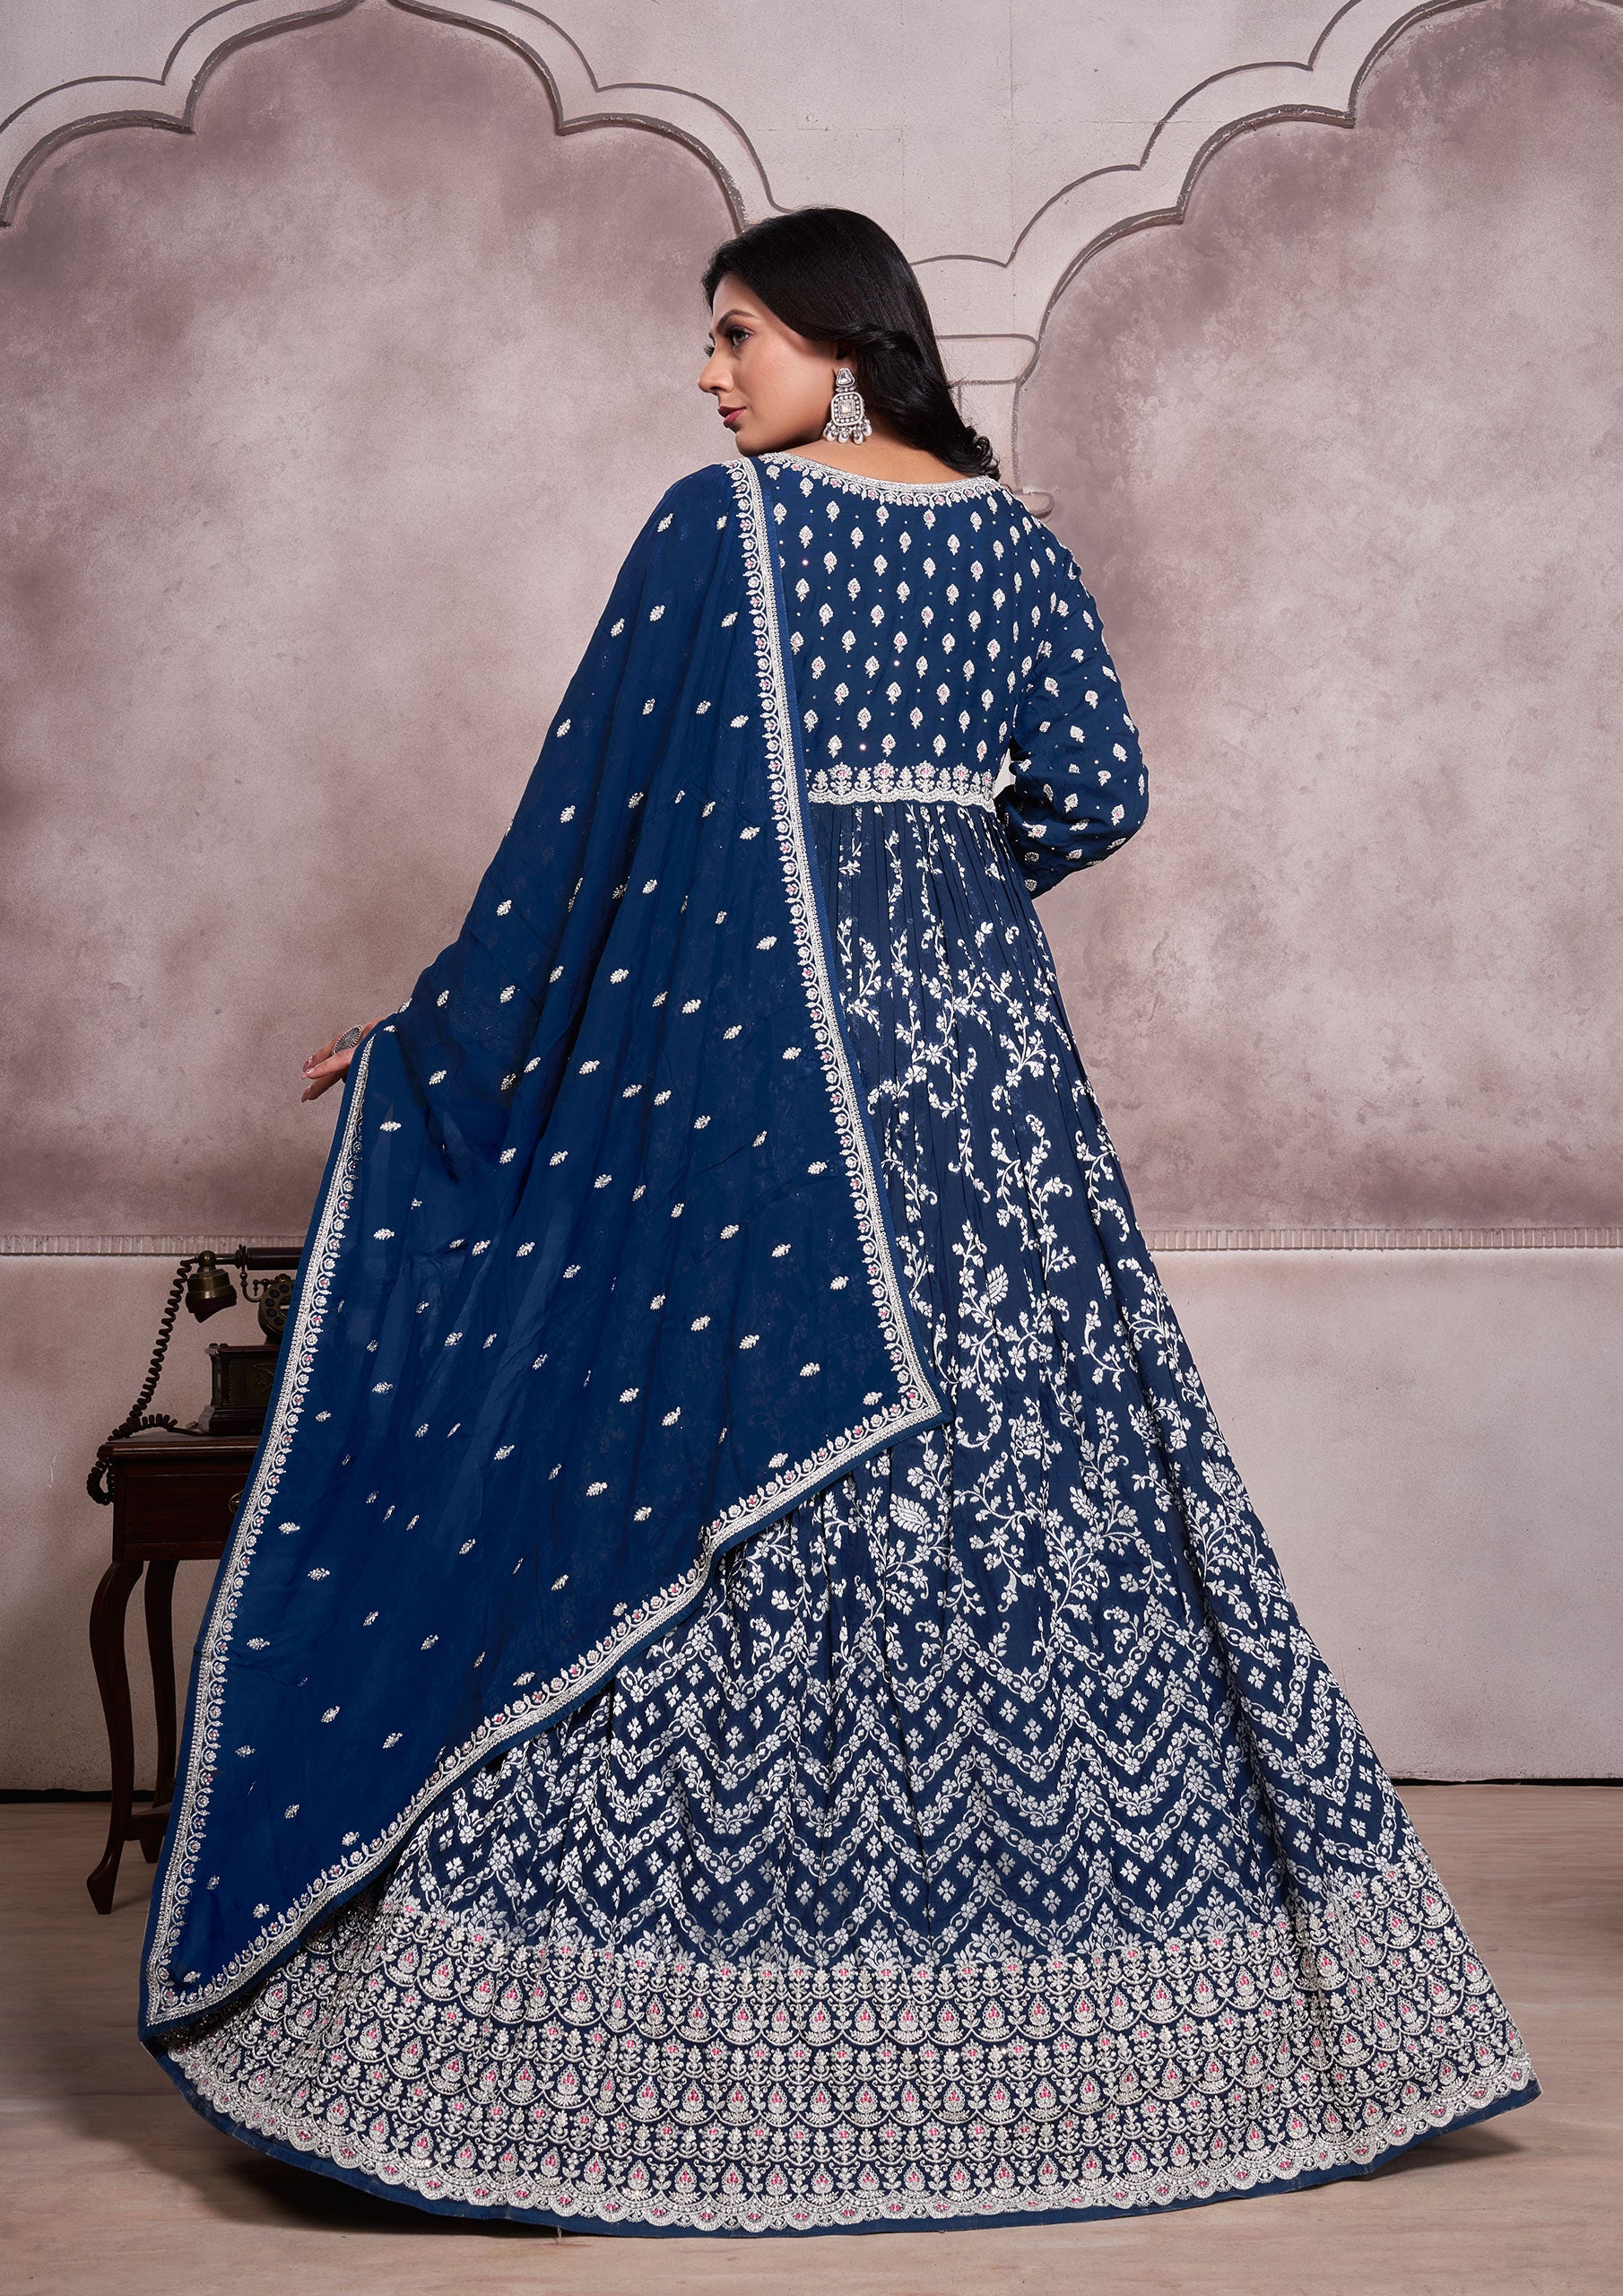 Blue embroidered anarkali suit with intricate patterns and elegant design, perfect for special occasions.